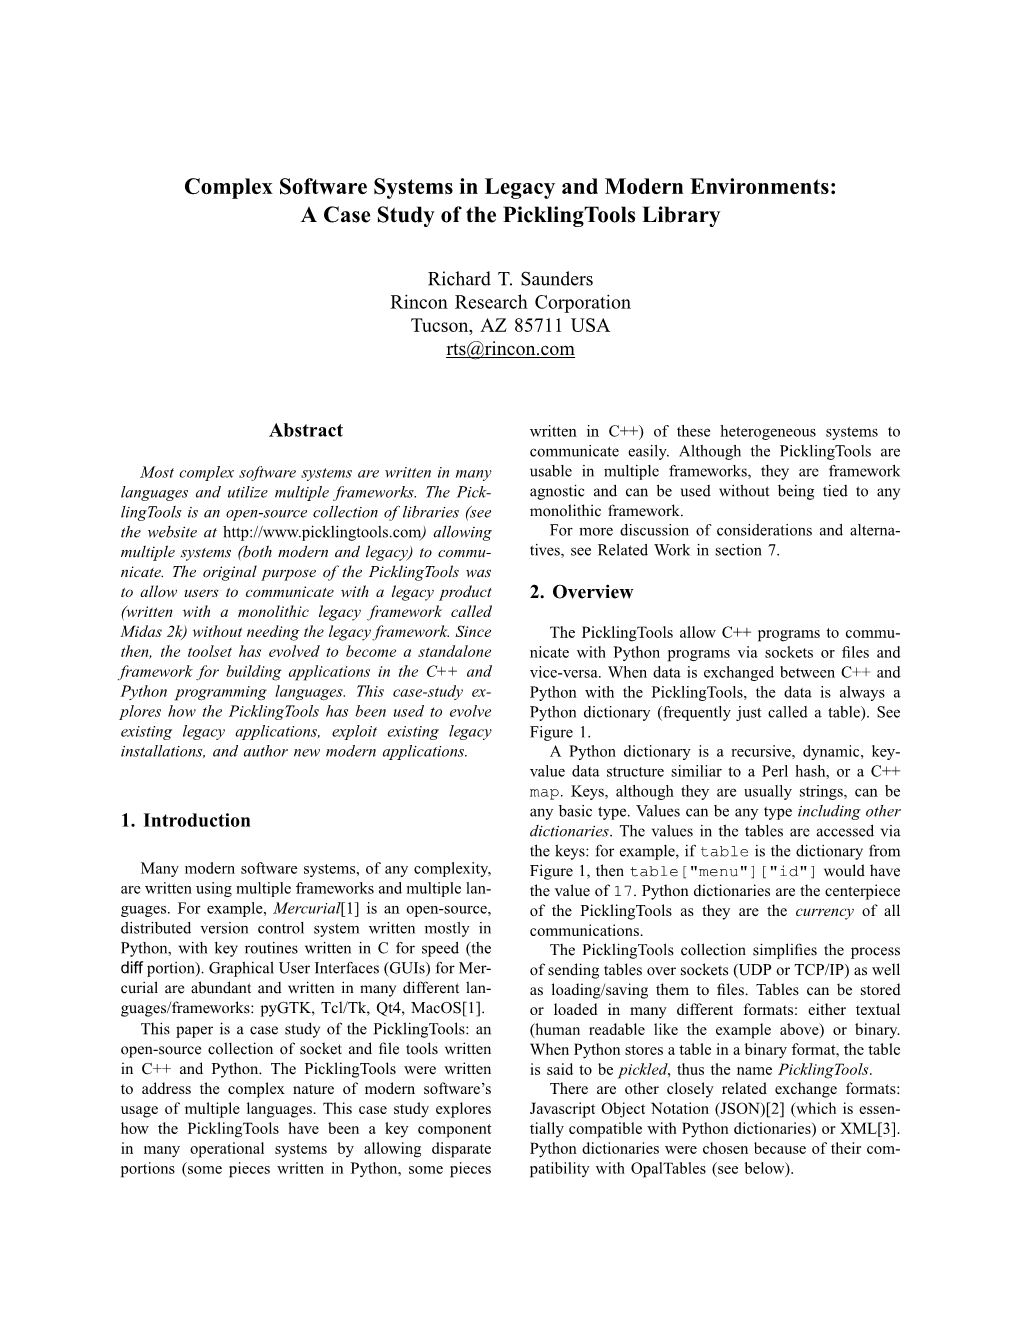 Complex Software Systems in Legacy and Modern Environments: a Case Study of the Picklingtools Library